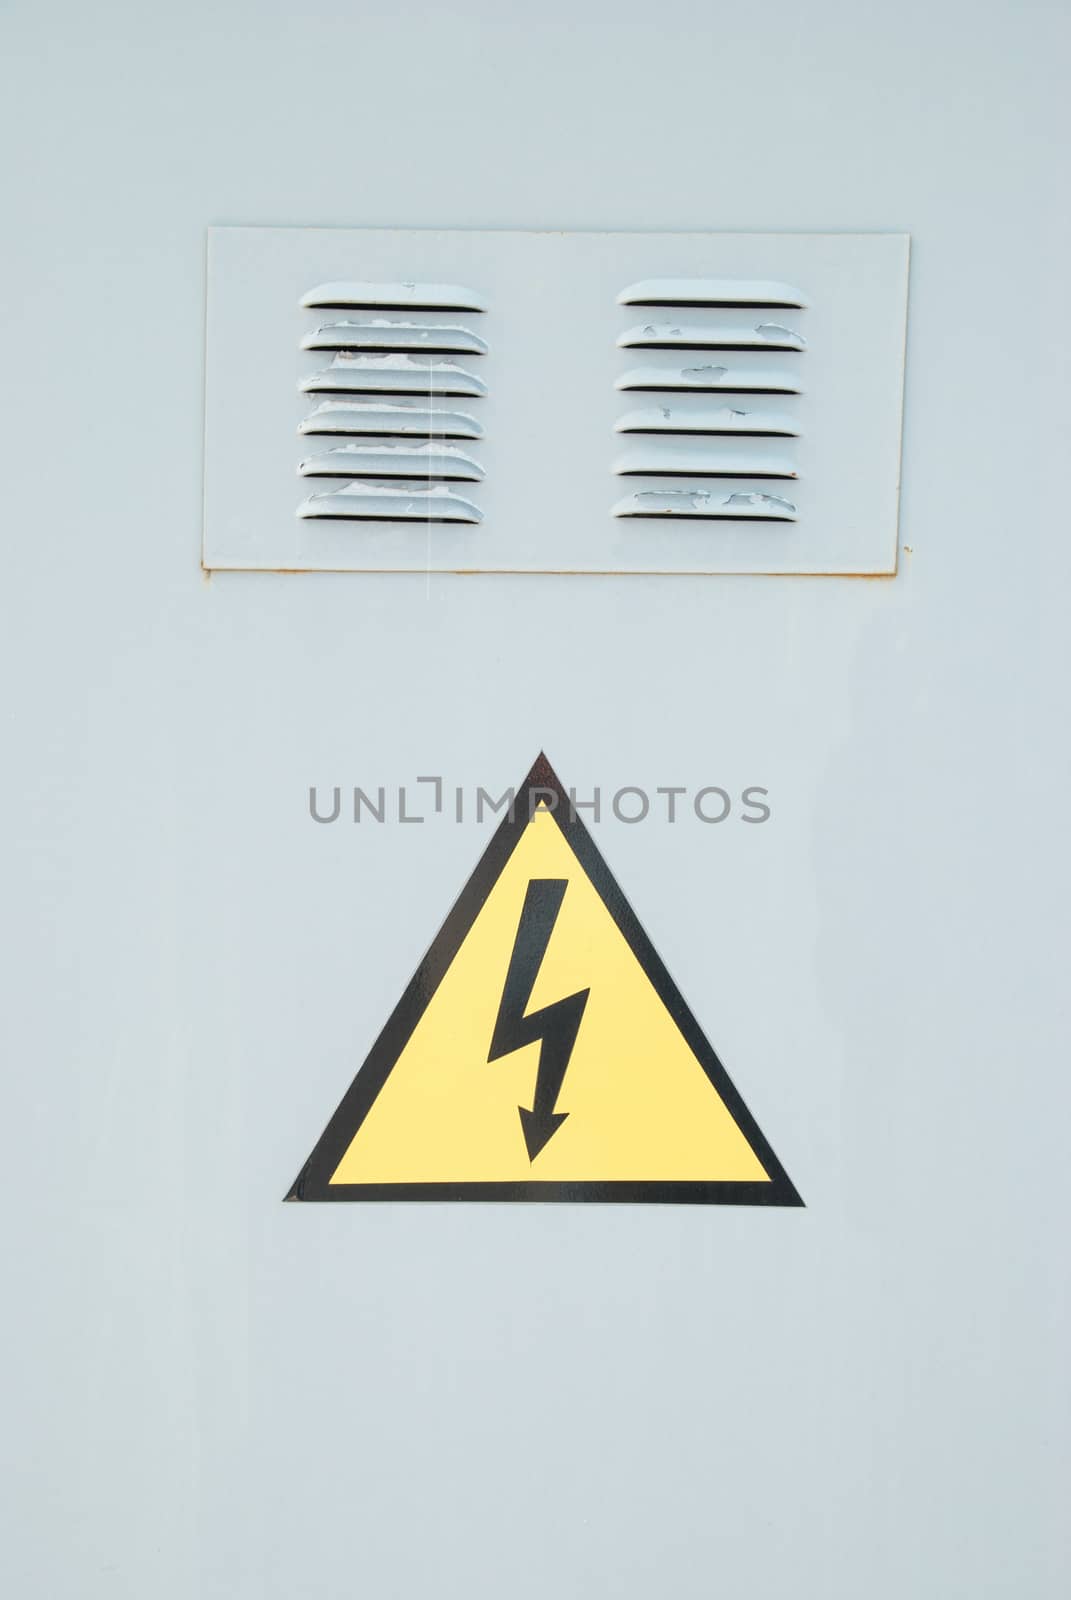 Yellow electric emergency sign with gray background